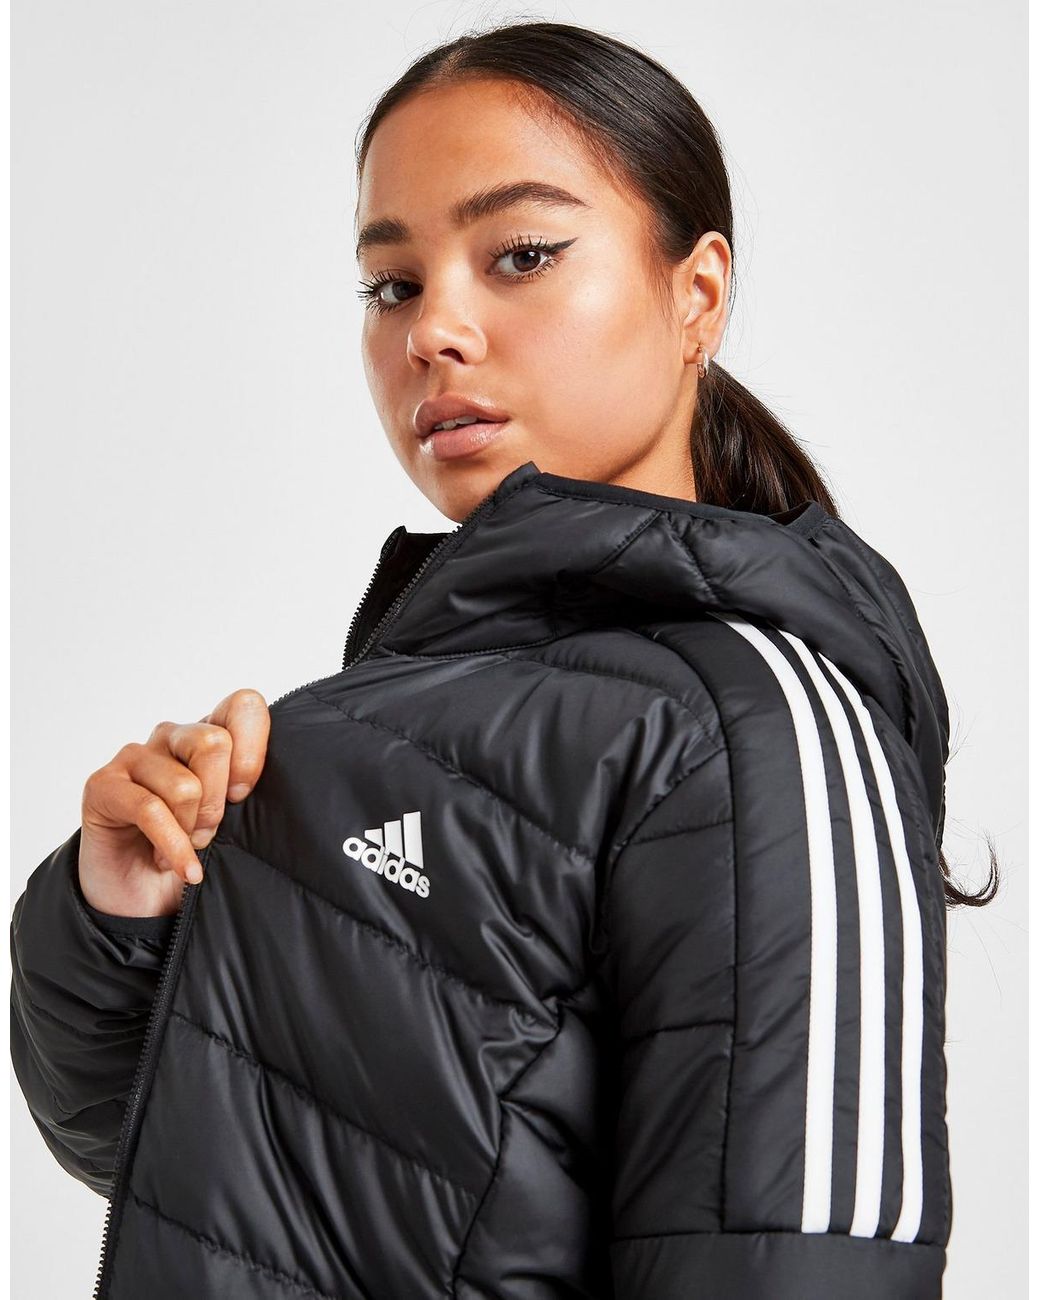 Buy adidas essential down parka jacket cheap online